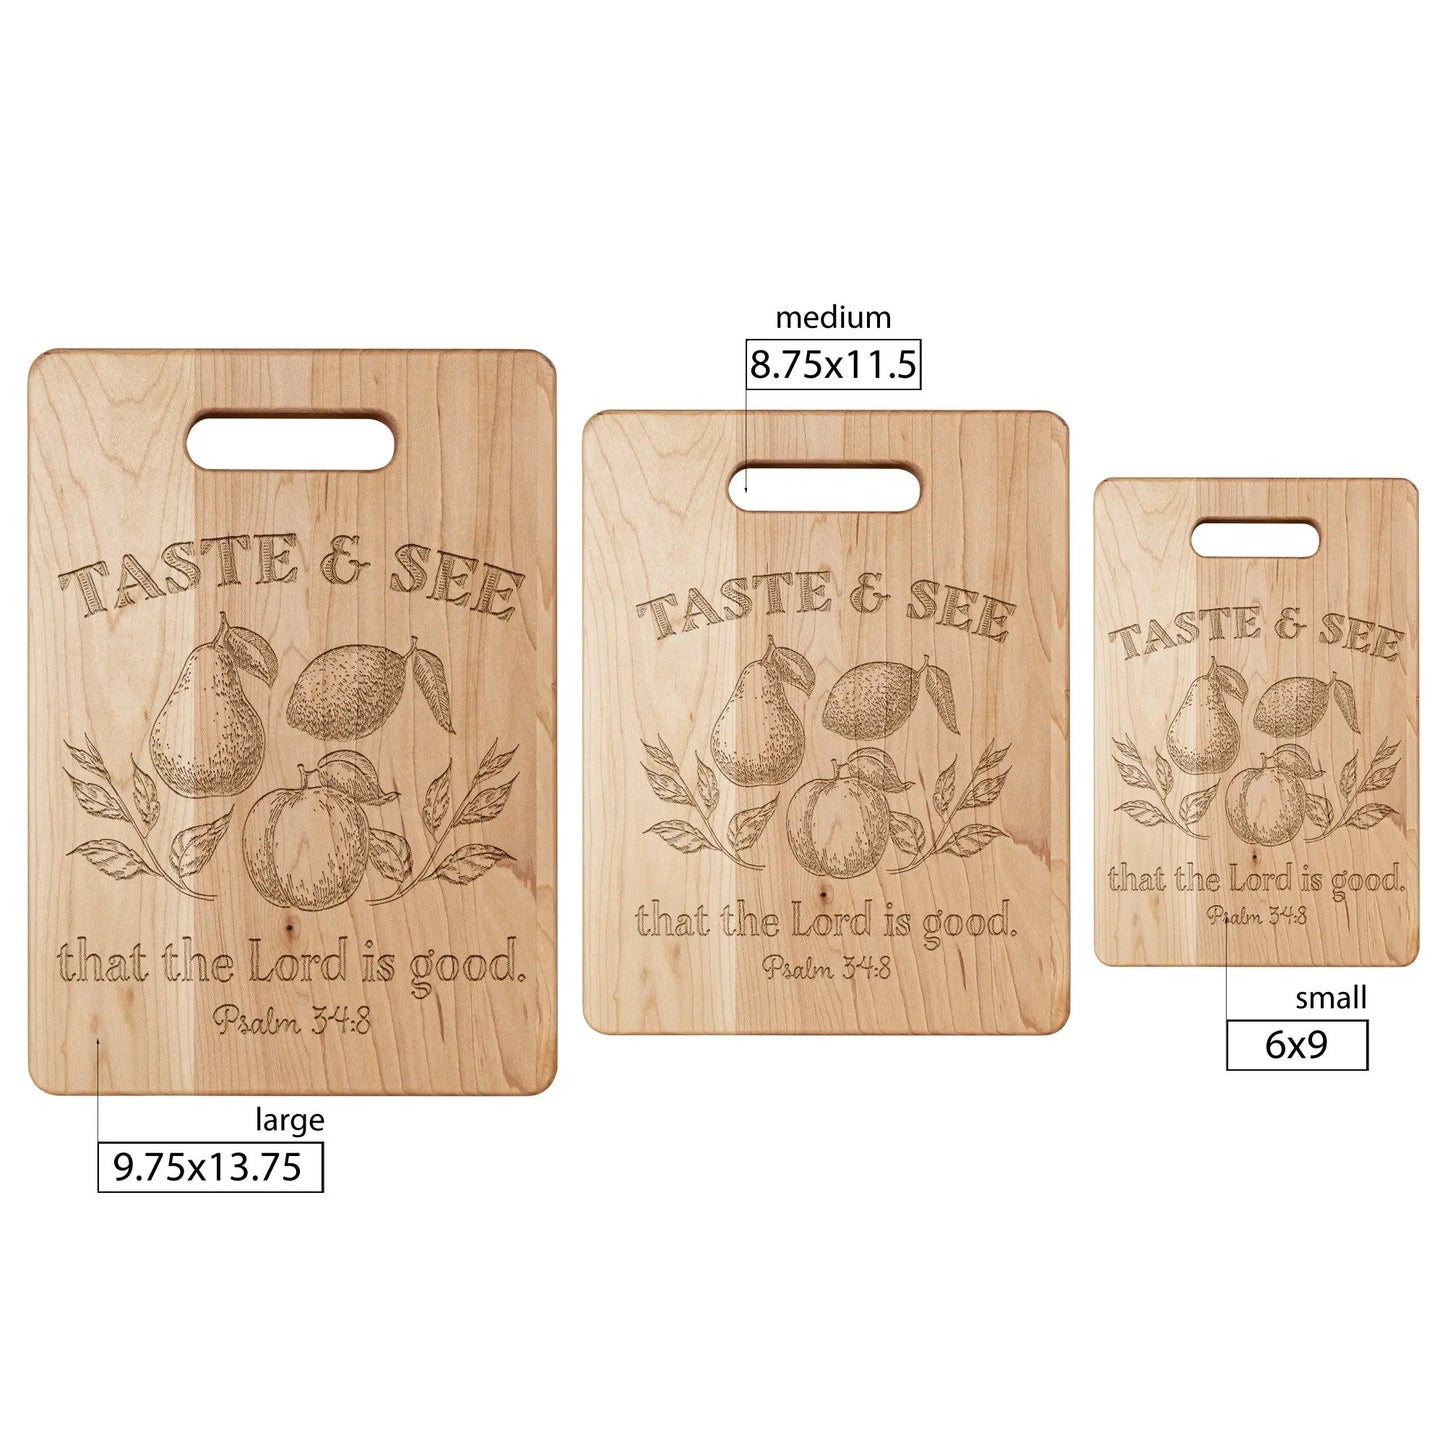 Taste and See Maple Cutting Board | Psalm 34:8 teelaunch